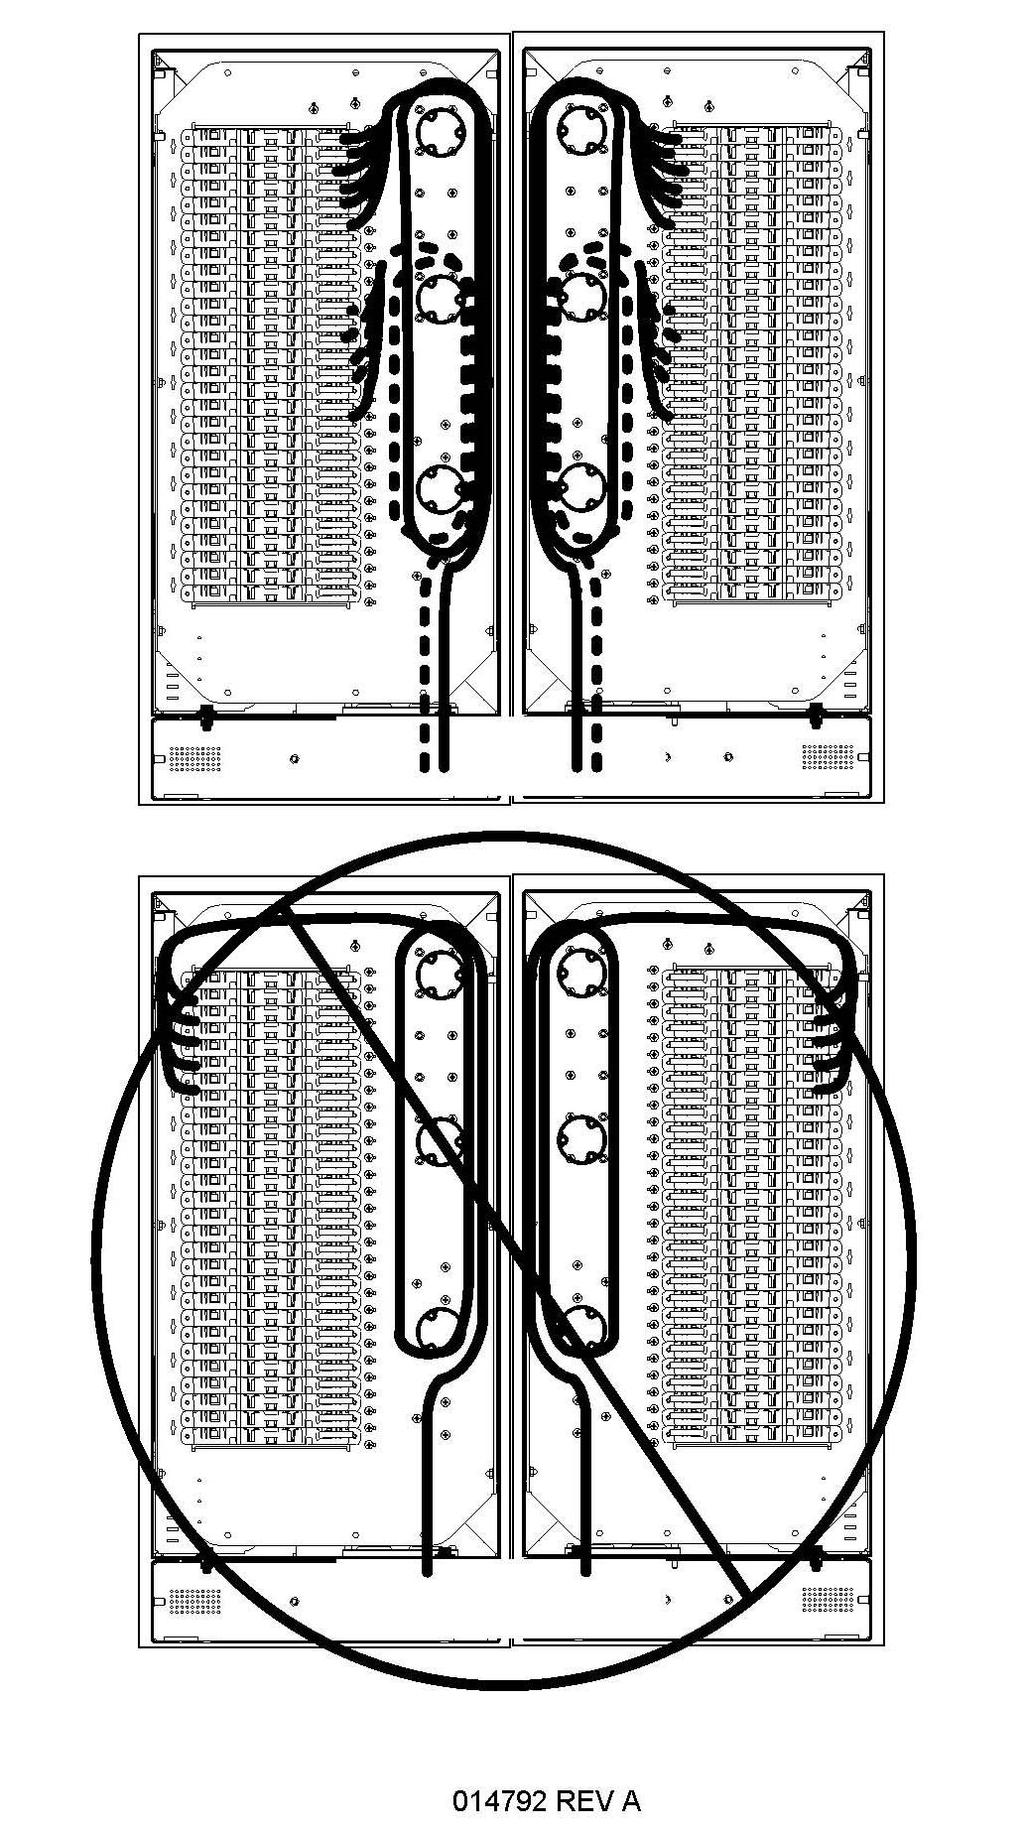 576 PON Routing (Rear of Cabinet) Suggested cable routing for feeder and distribution cables in the rear